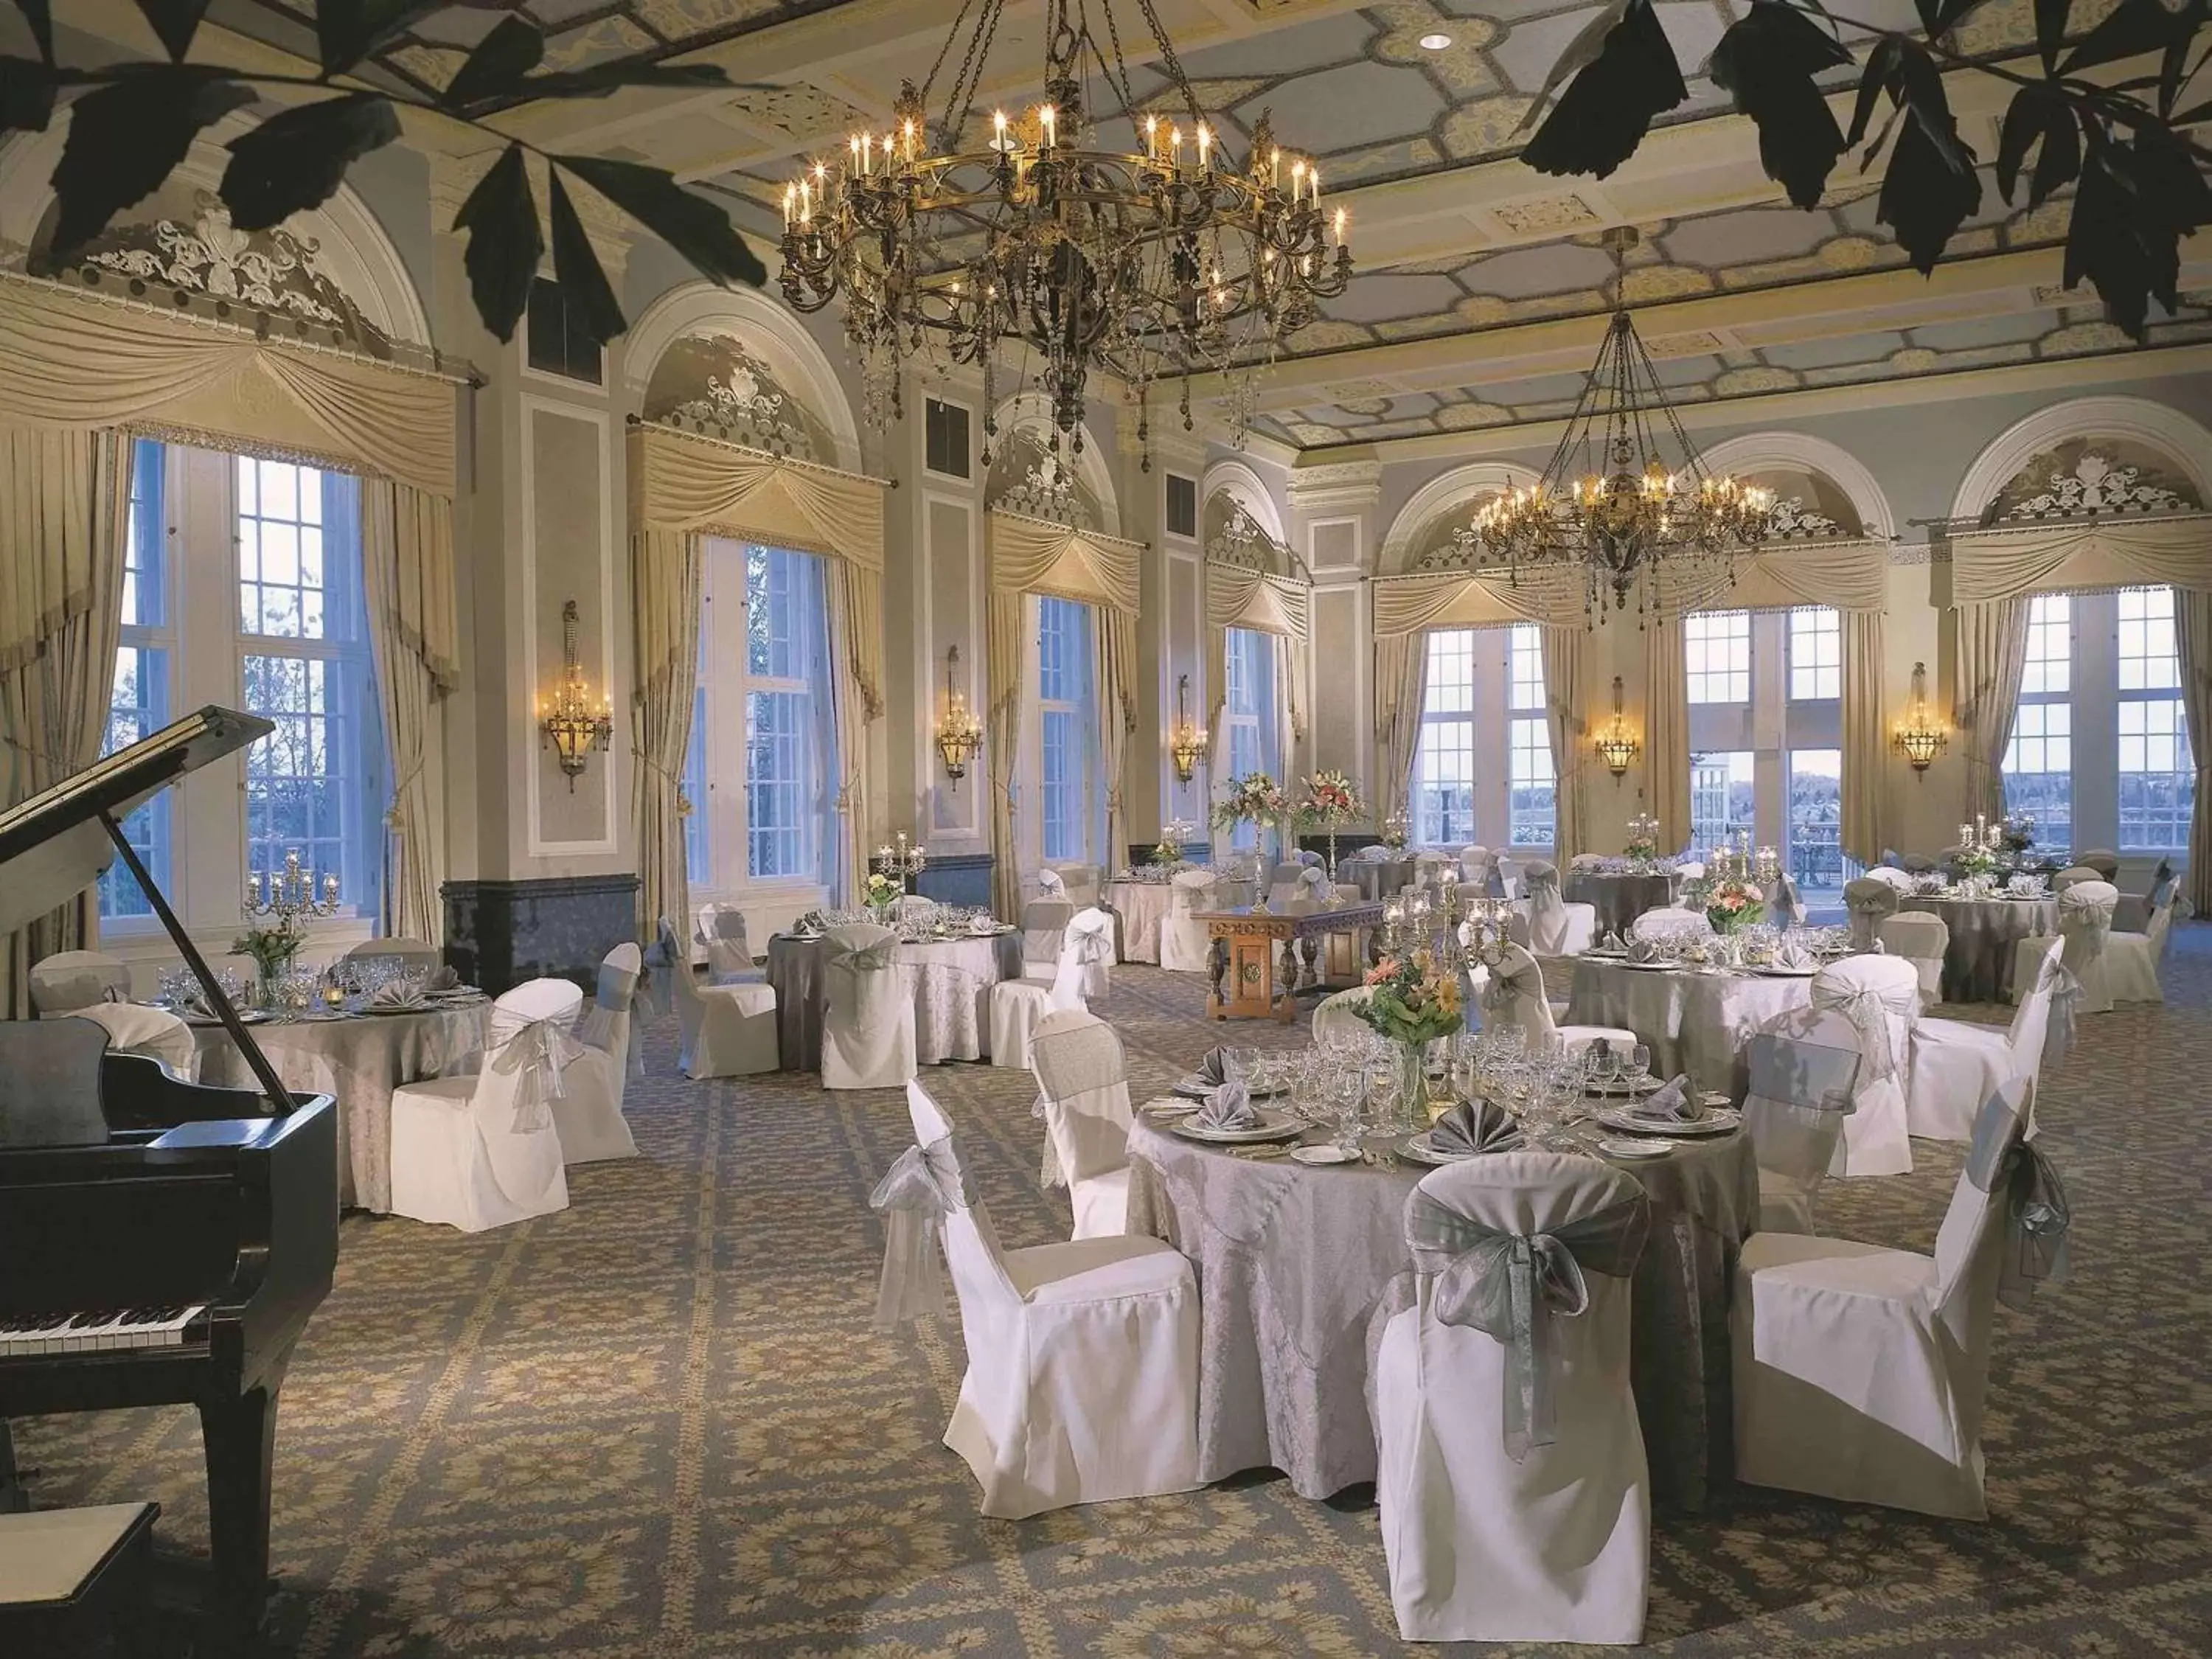 Meeting/conference room, Banquet Facilities in Fairmont Hotel Macdonald